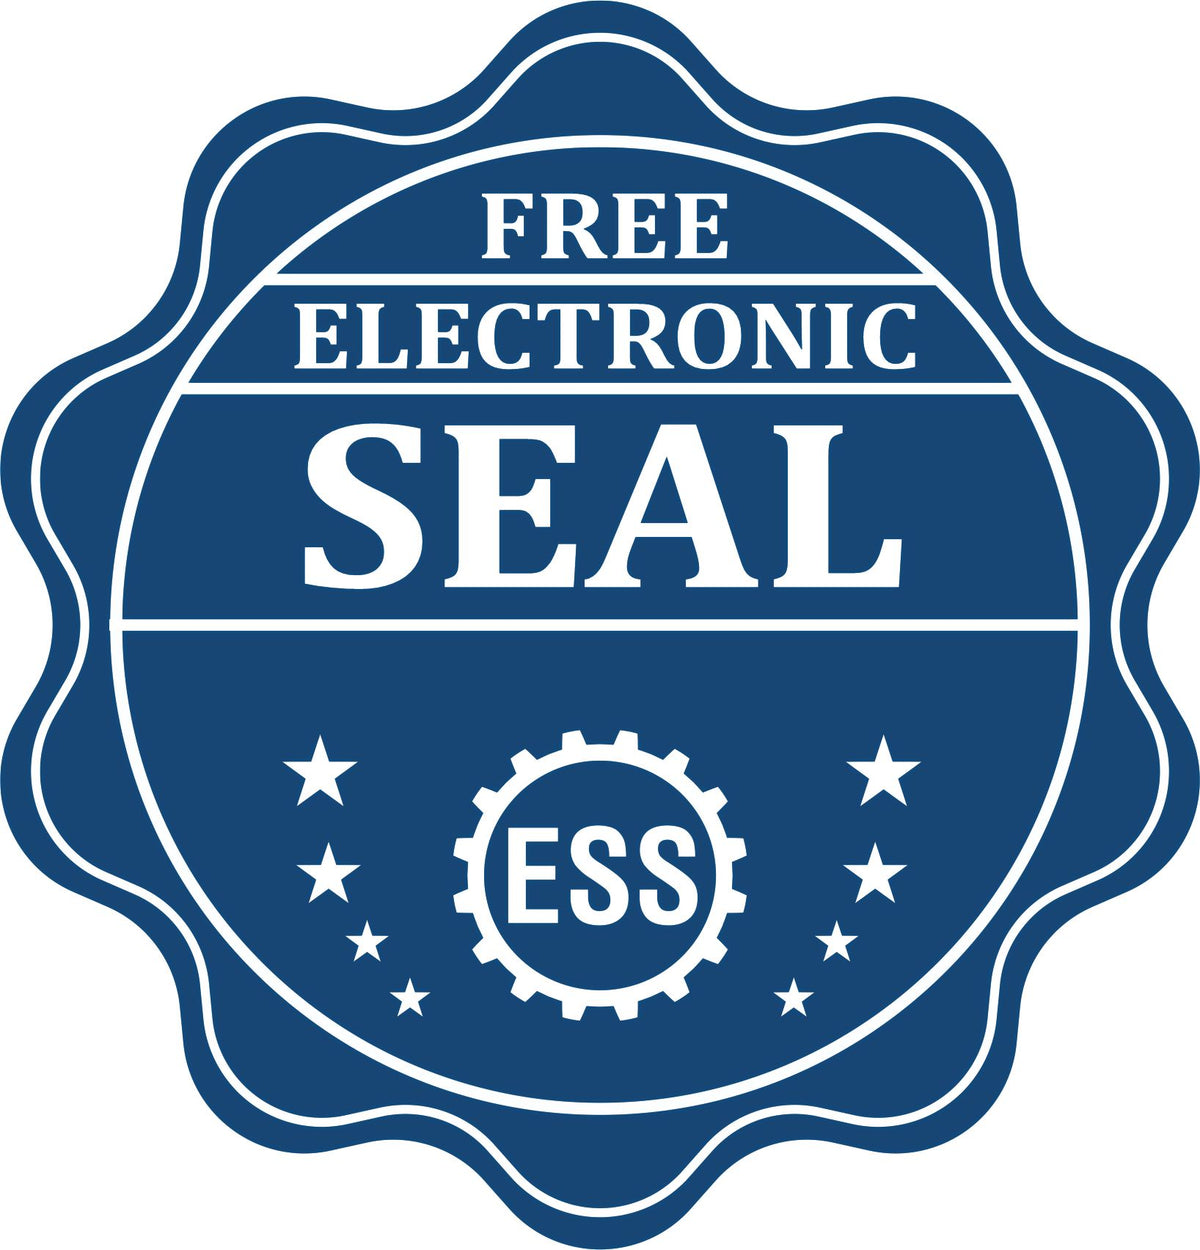 A badge showing a free electronic seal for the Hybrid Ohio Land Surveyor Seal with stars and the ESS gear on the emblem.